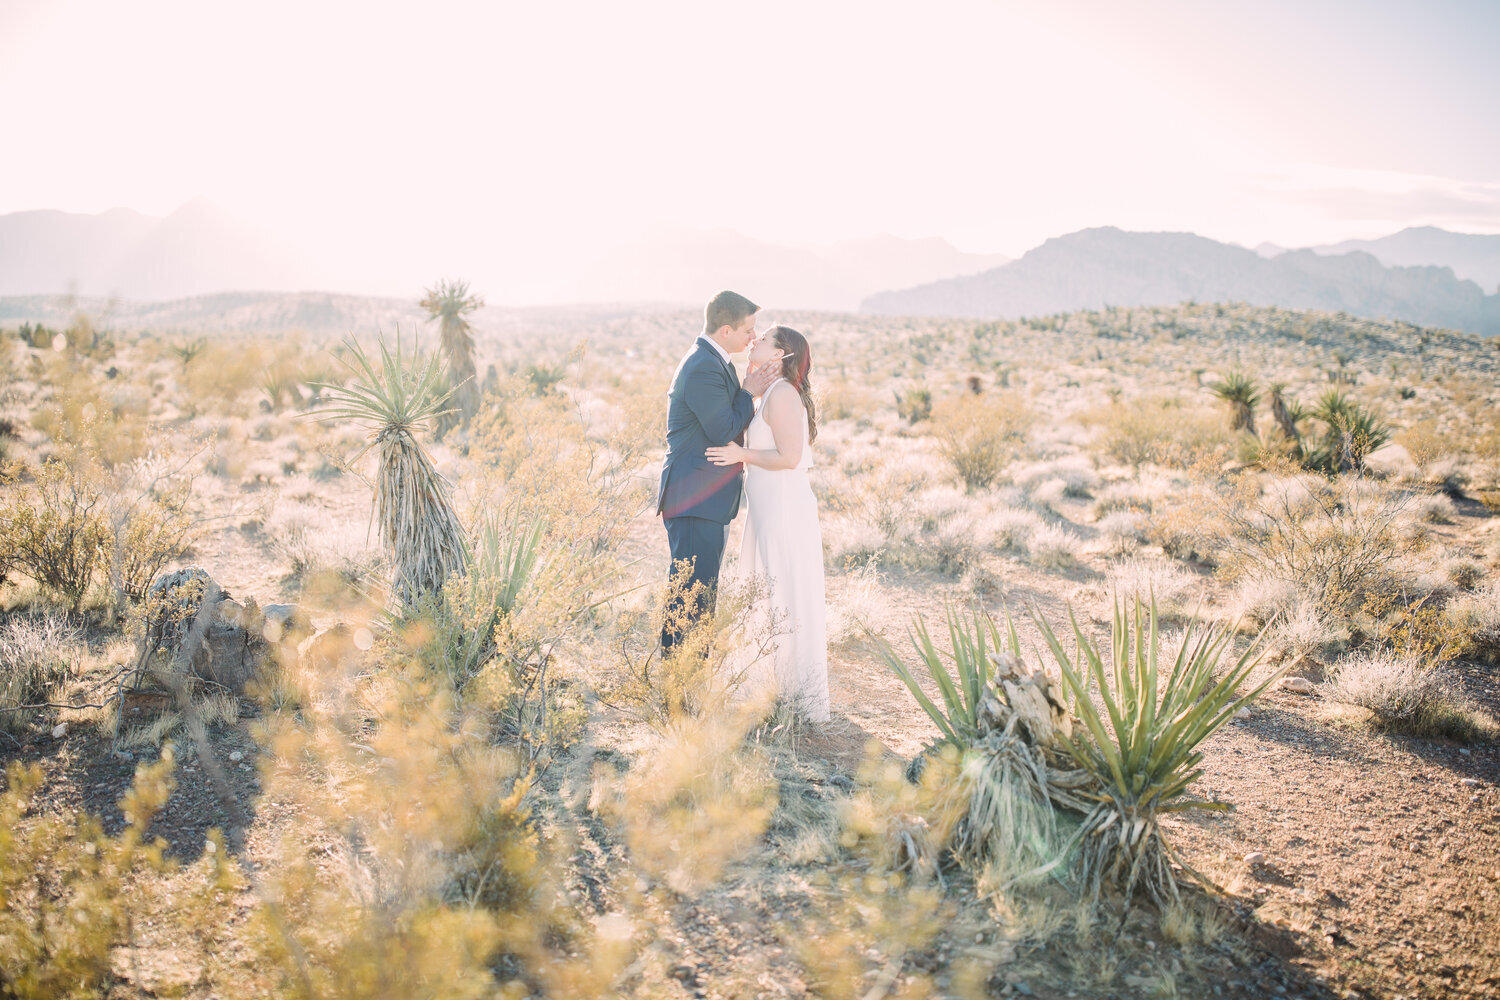 where to elope in vegas